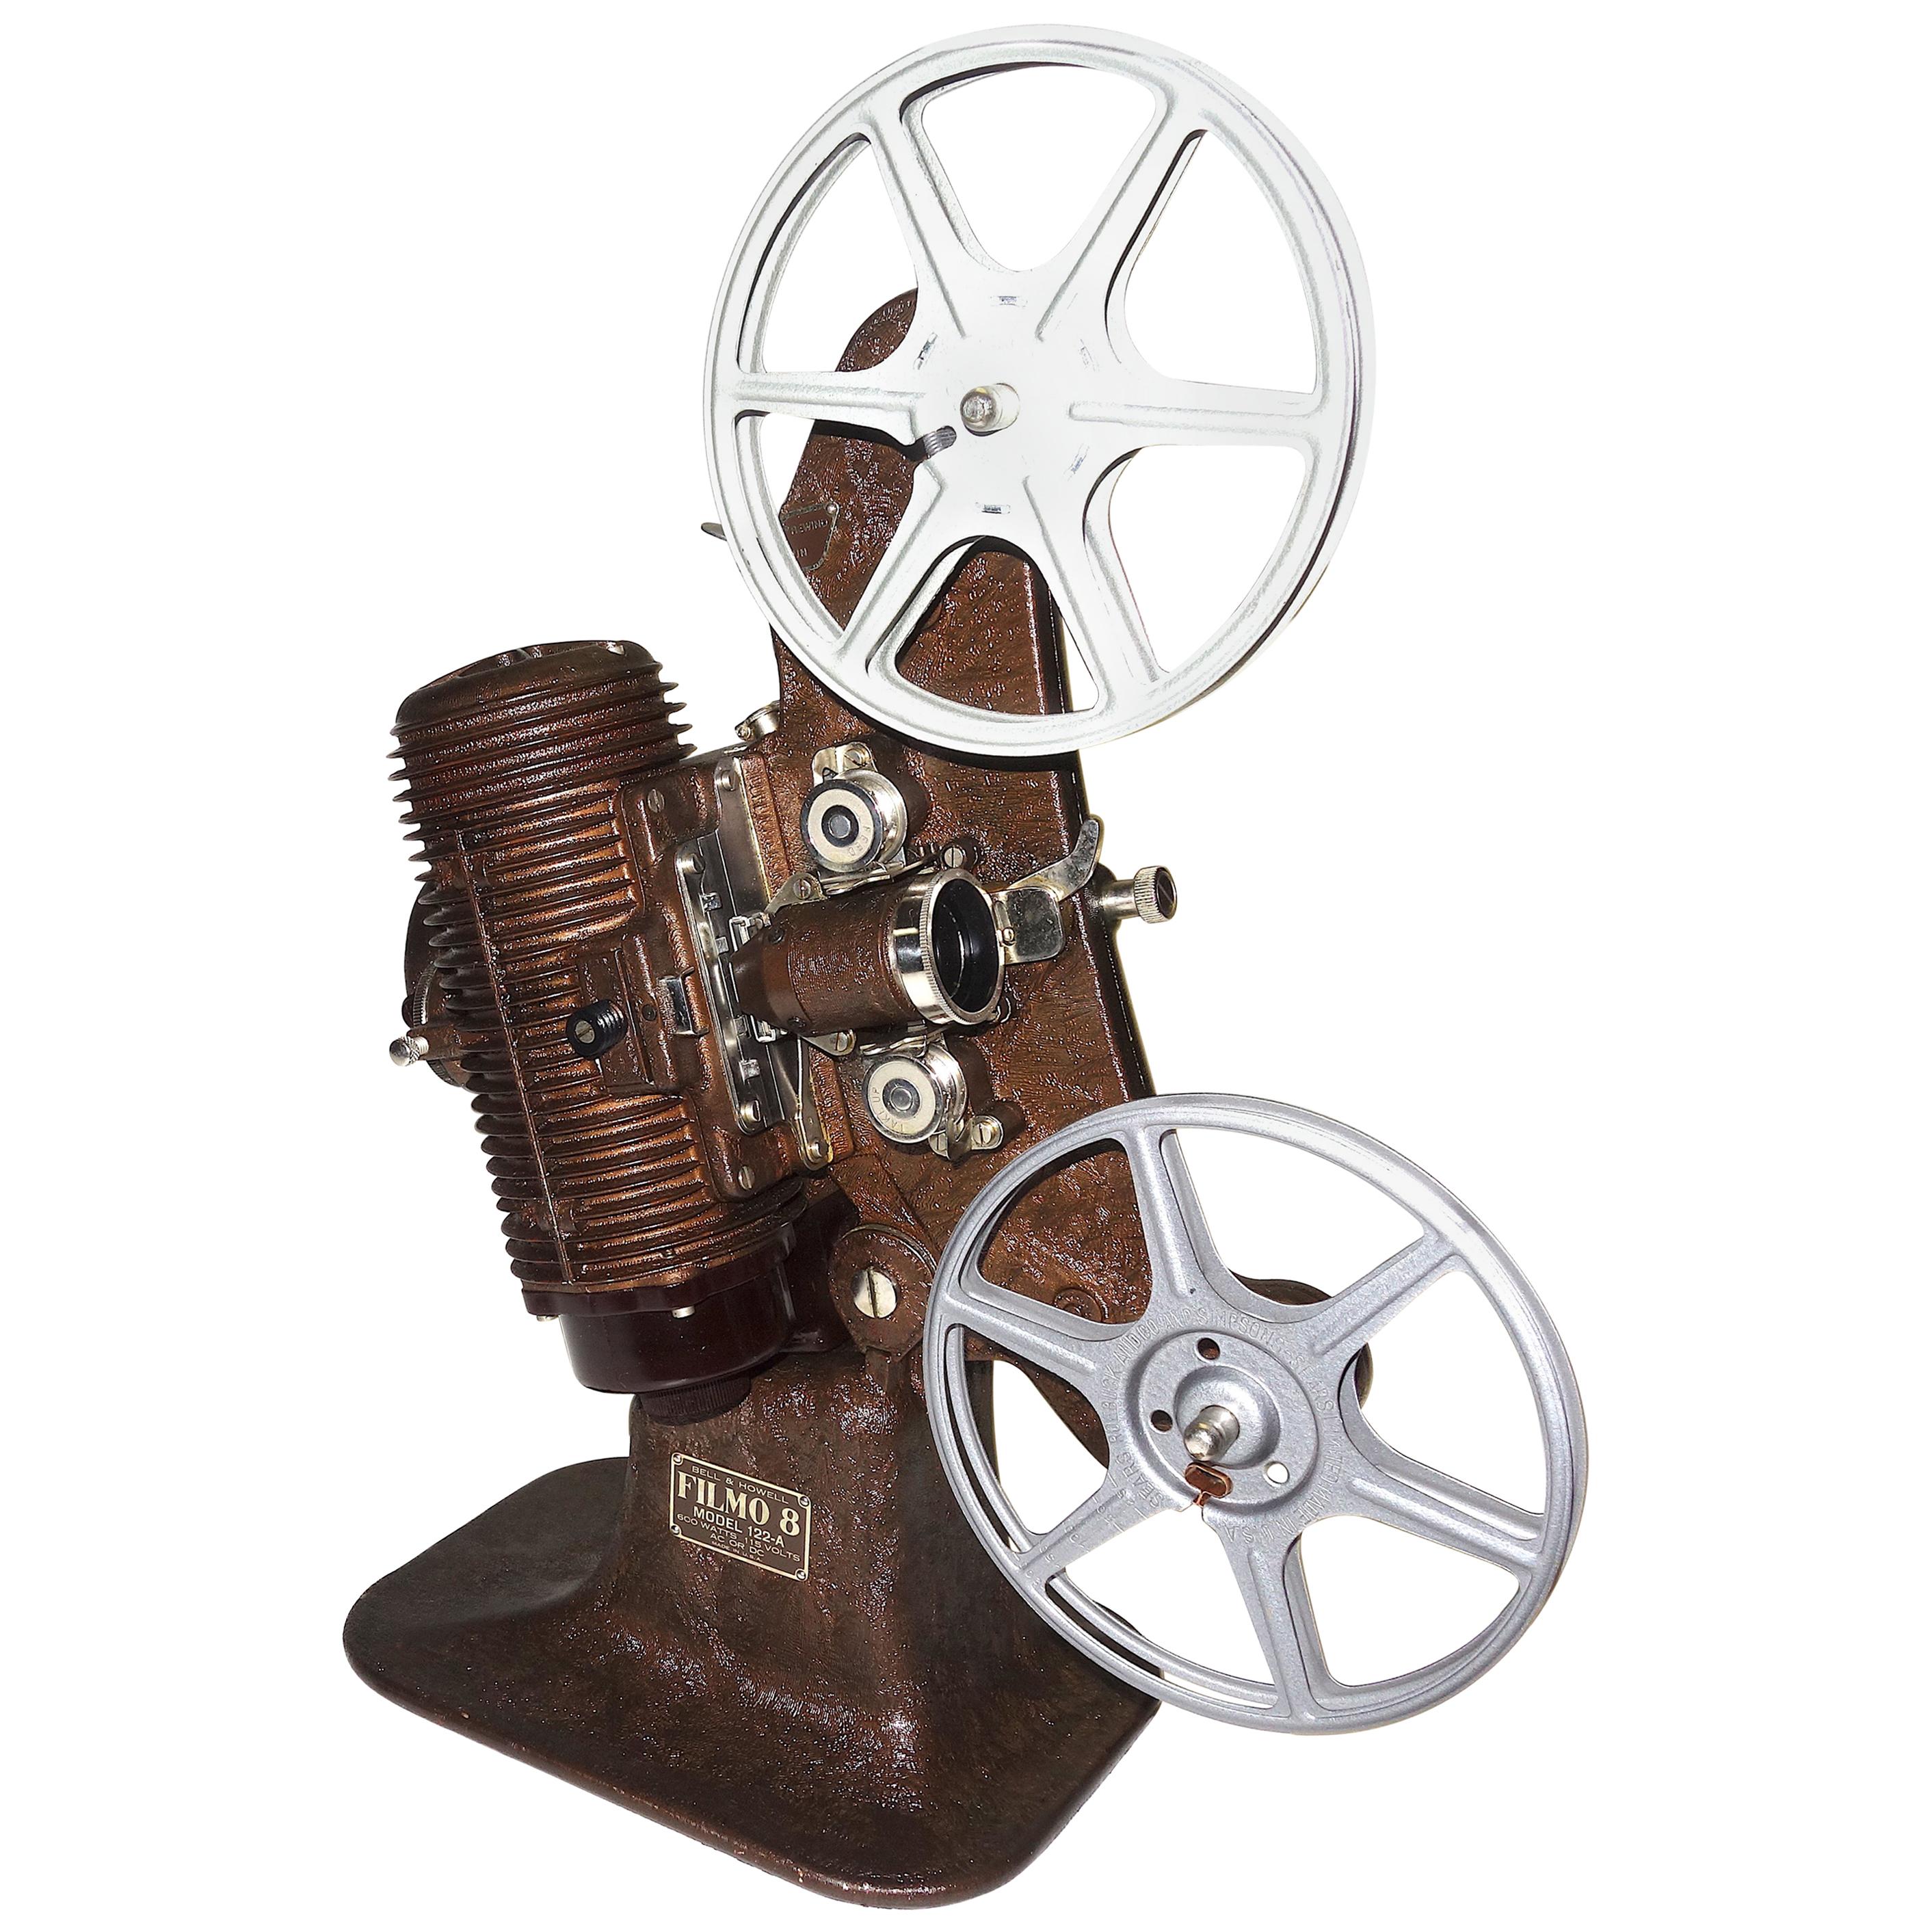 Bell & Howell Early 8mm Movie Projector, circa 1934, All Original Display Piece For Sale